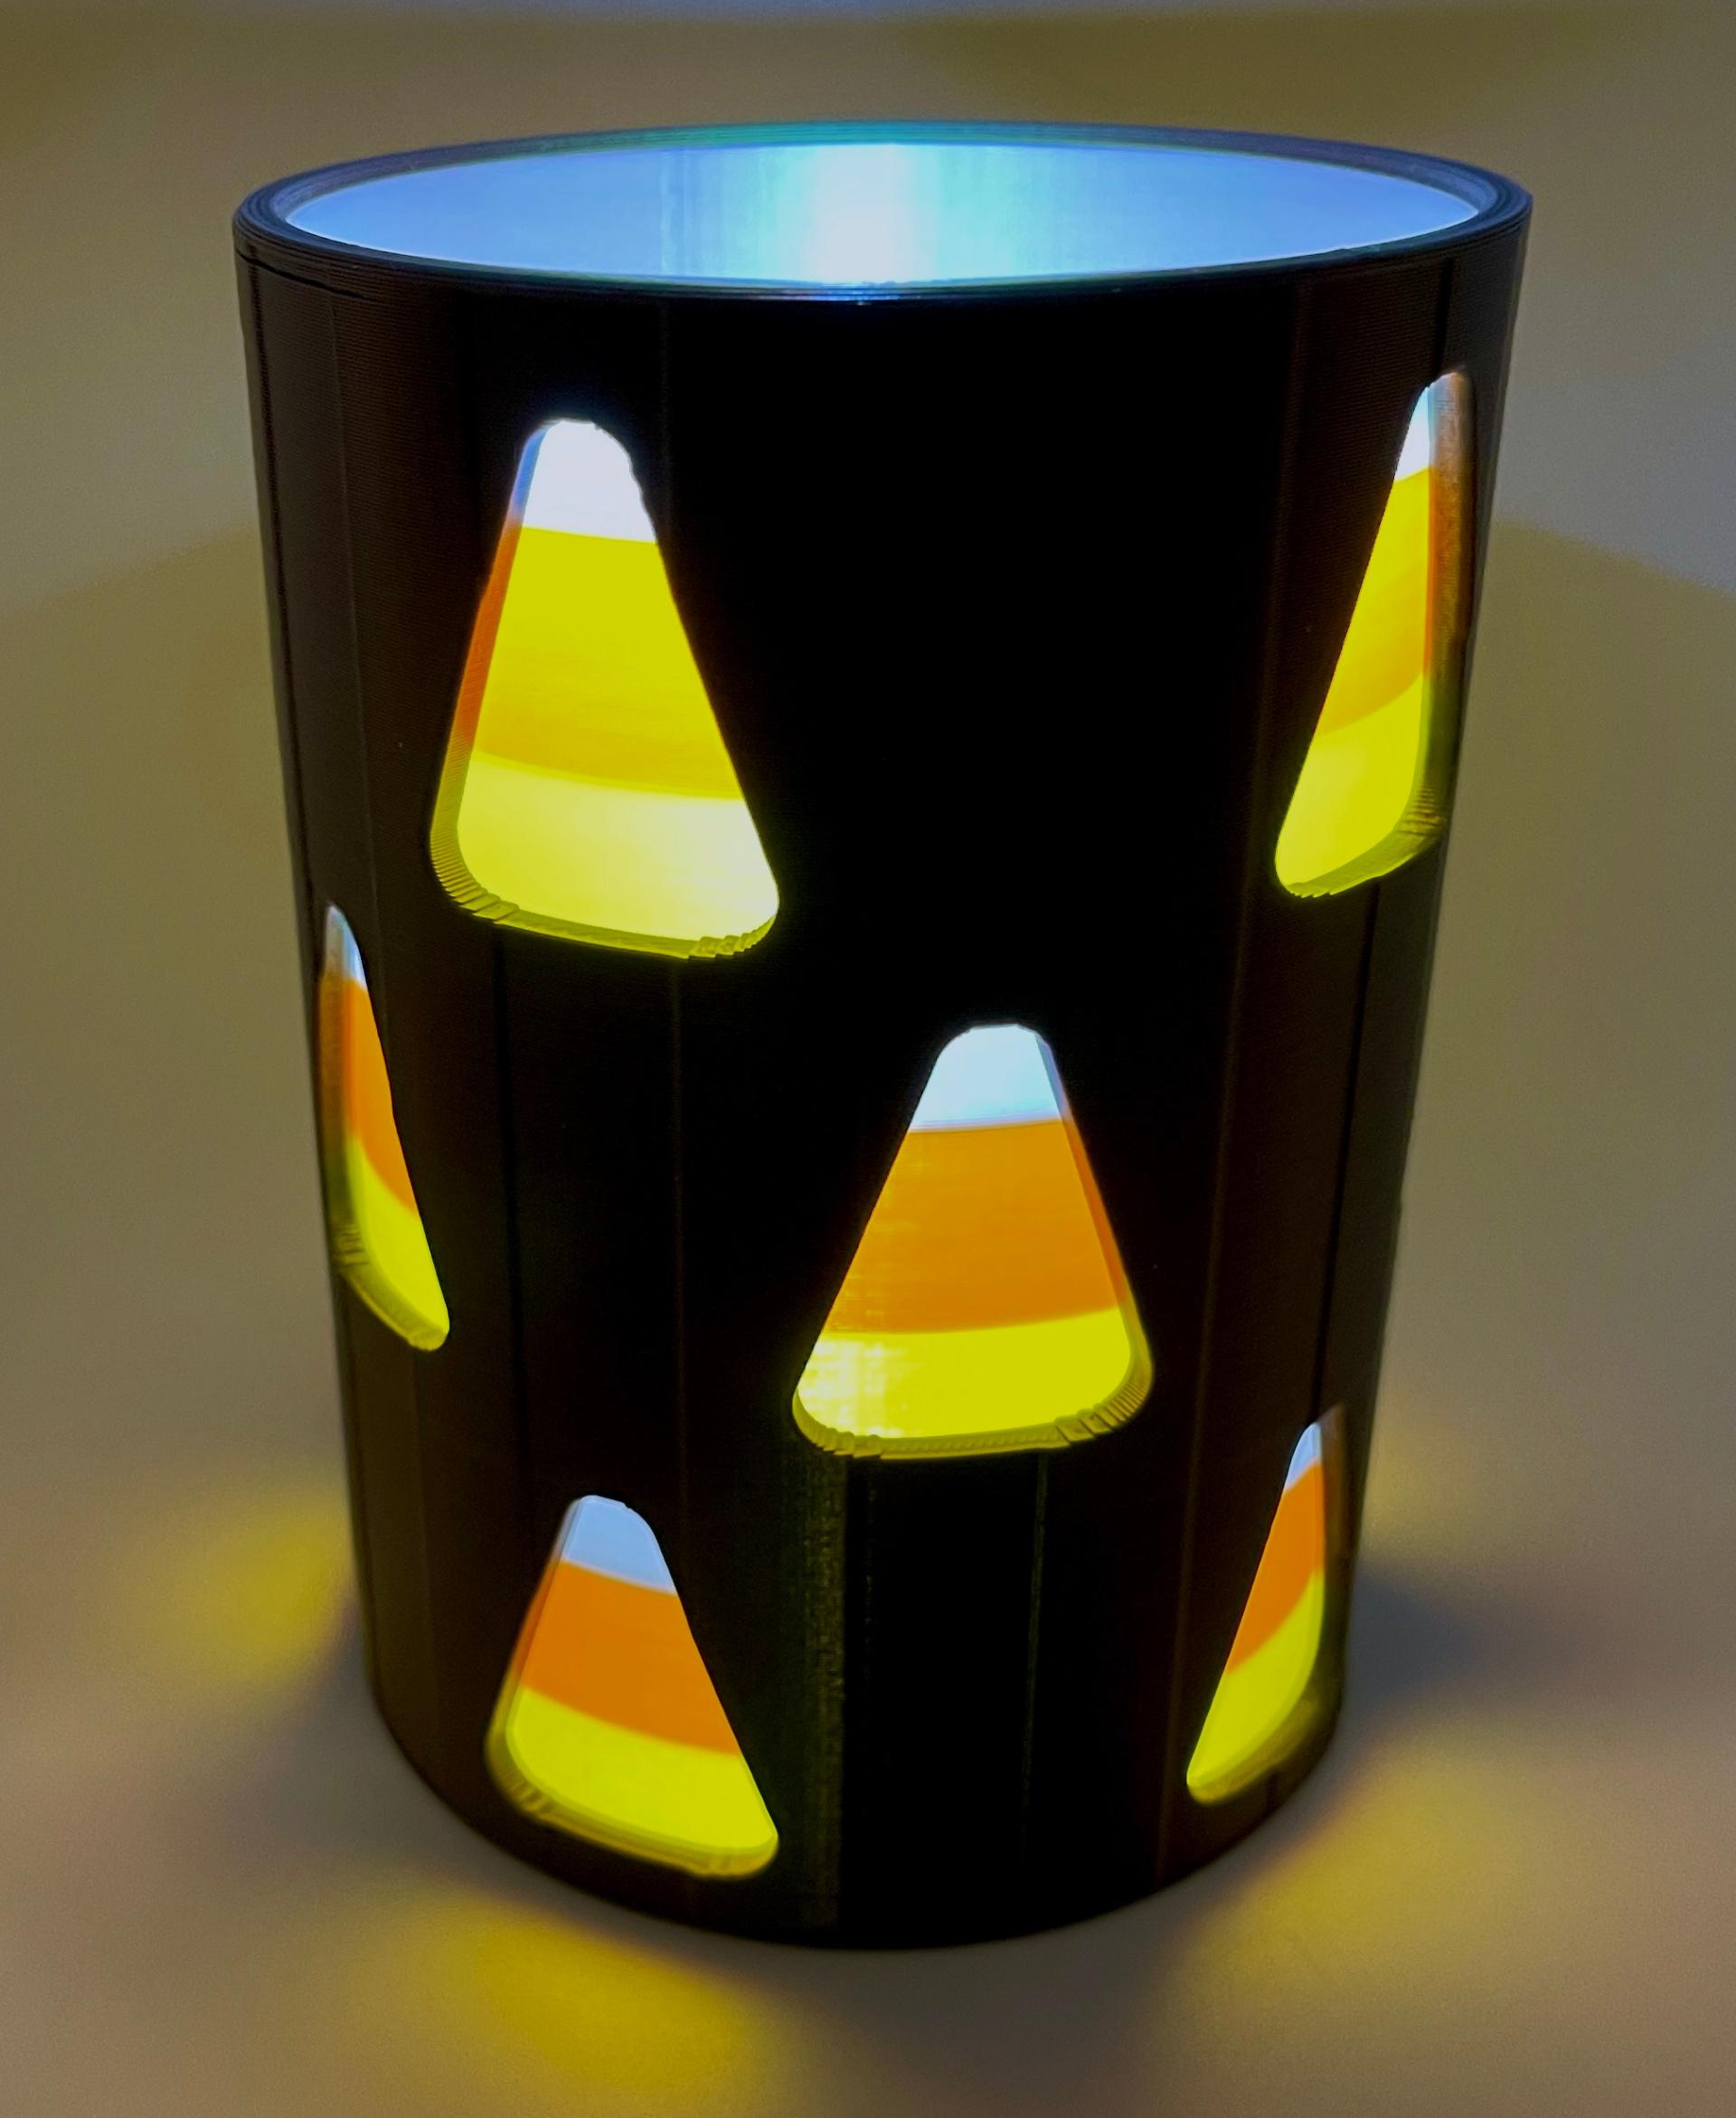 Candy Corn Cutout Vase with Insert 3d model